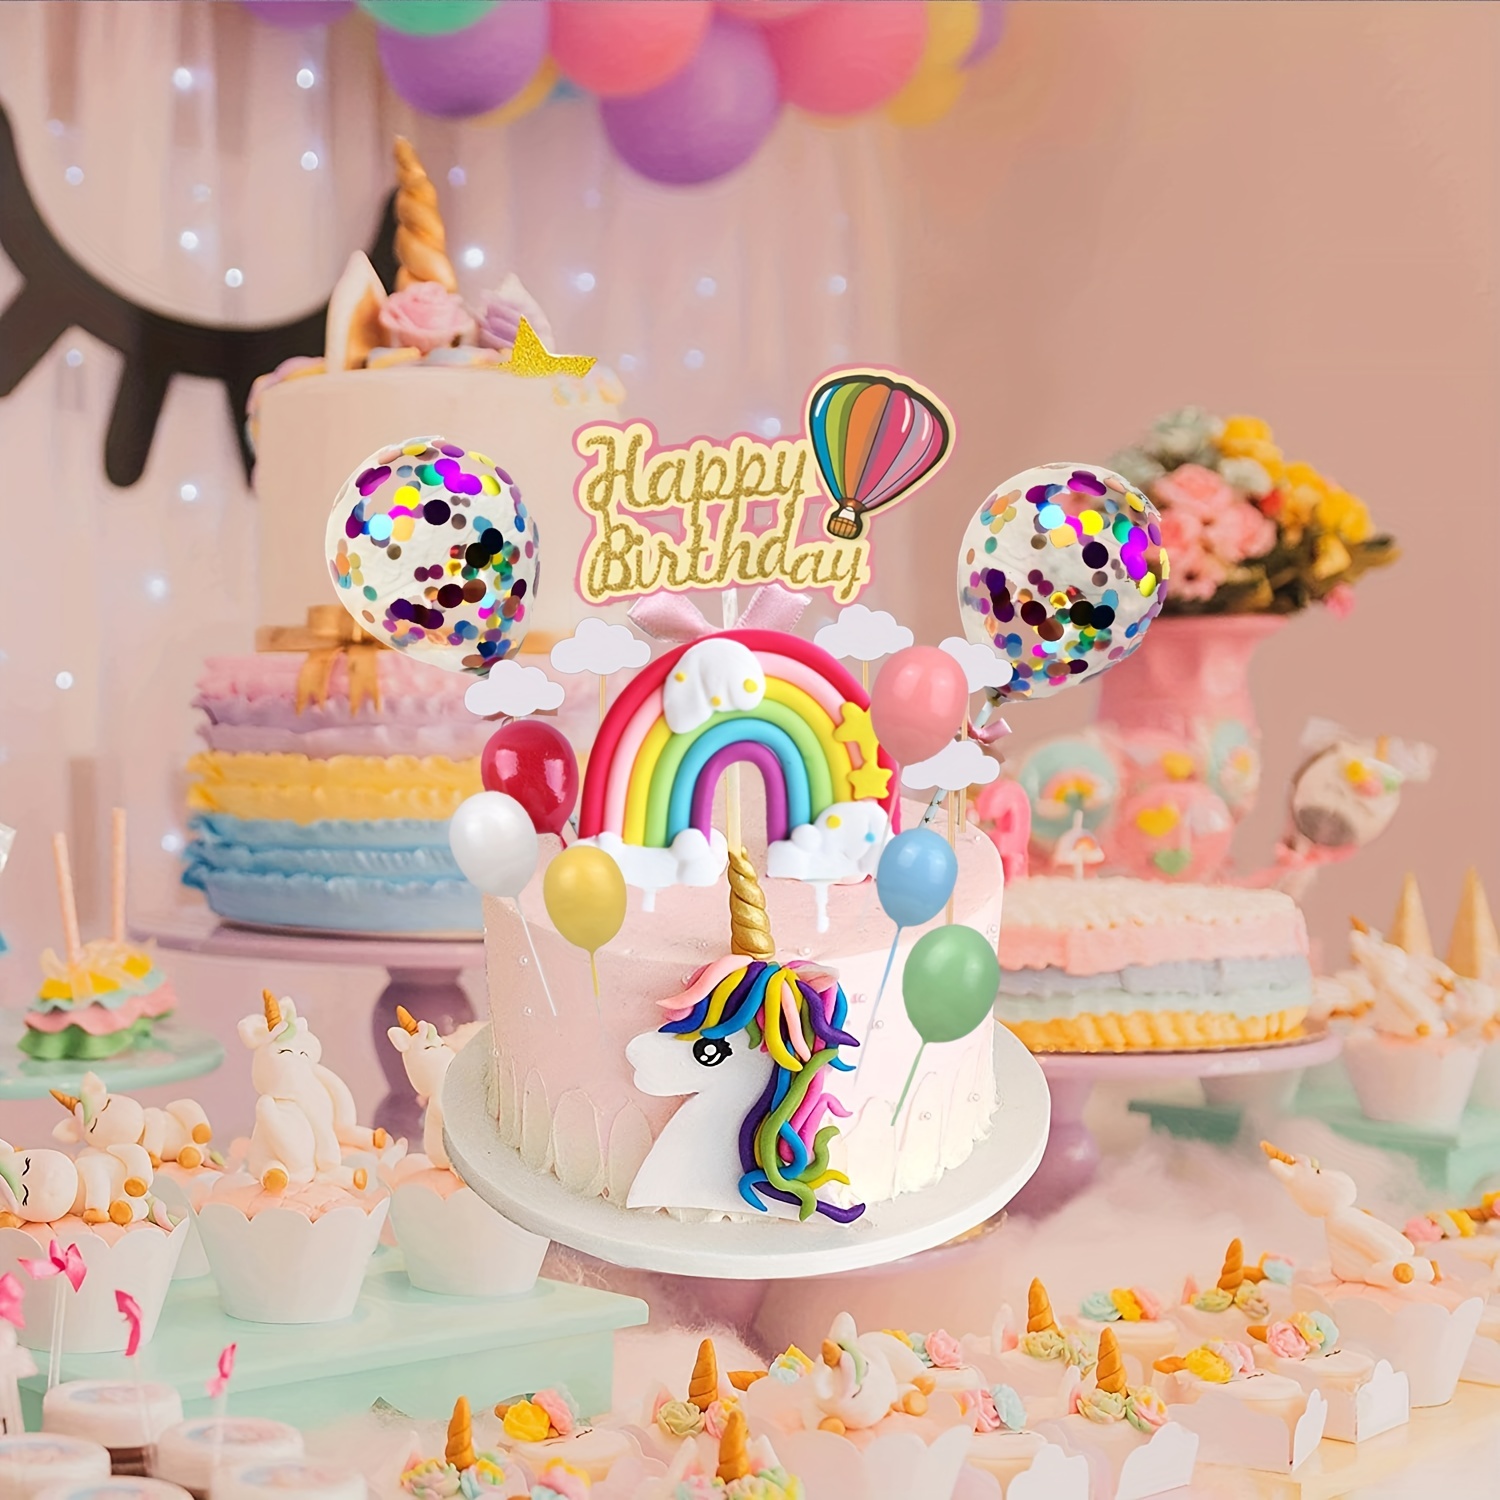 Colorful Party Table with Cakes and Balloons